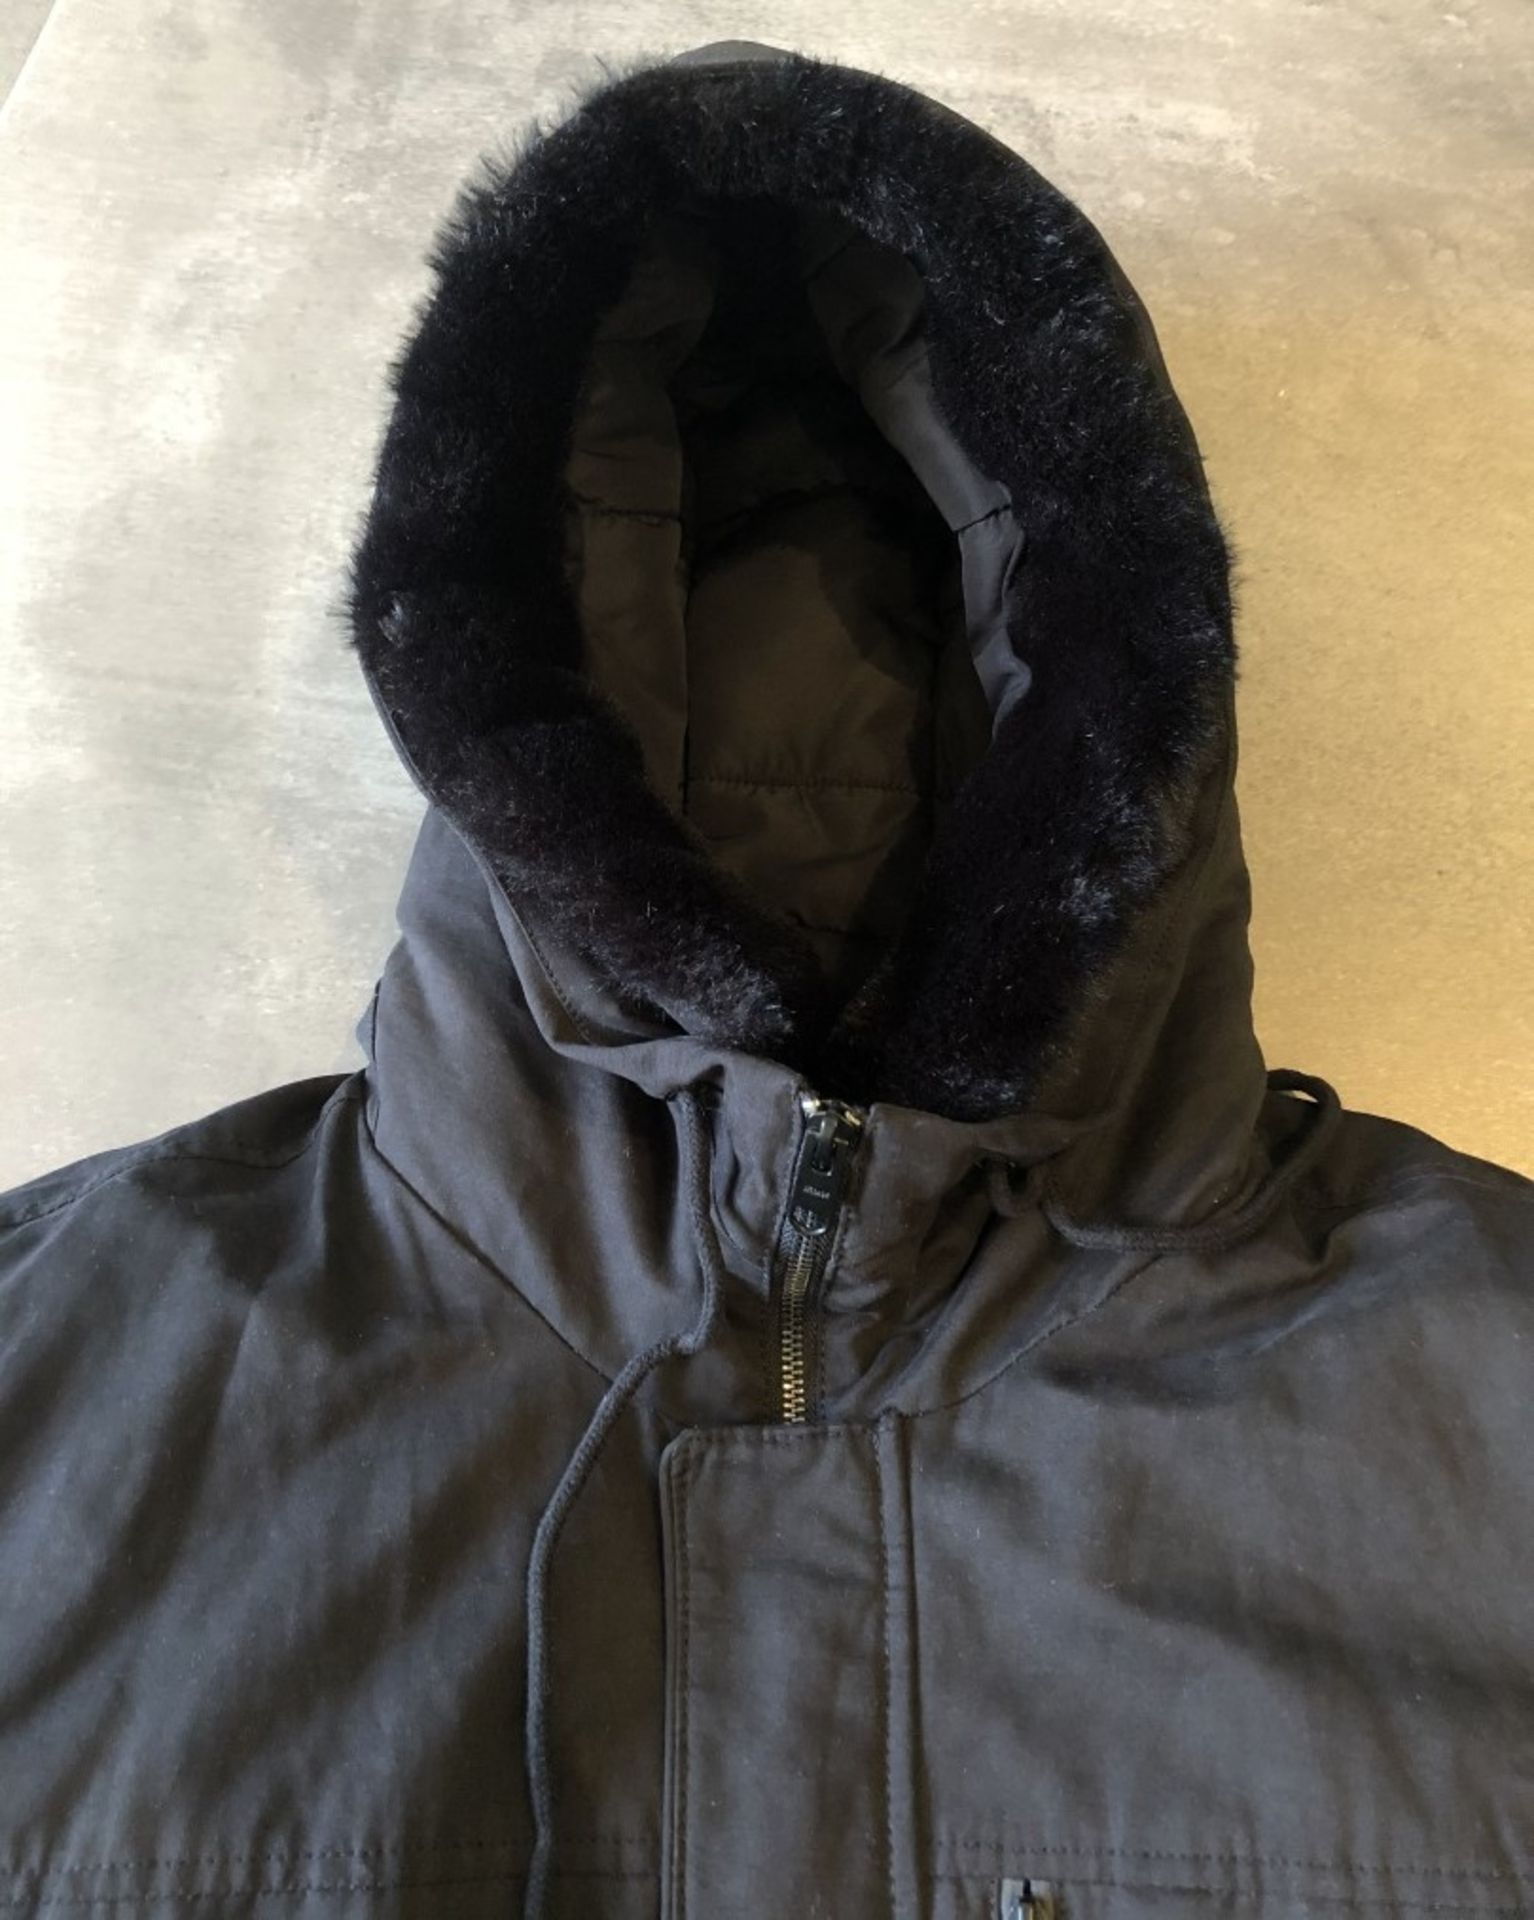 1 x Men's Genuine Zara Coat In Black With A Faux Fur Lined Hood - Size (EU/UK): XL/XL - Preowned - - Image 4 of 8